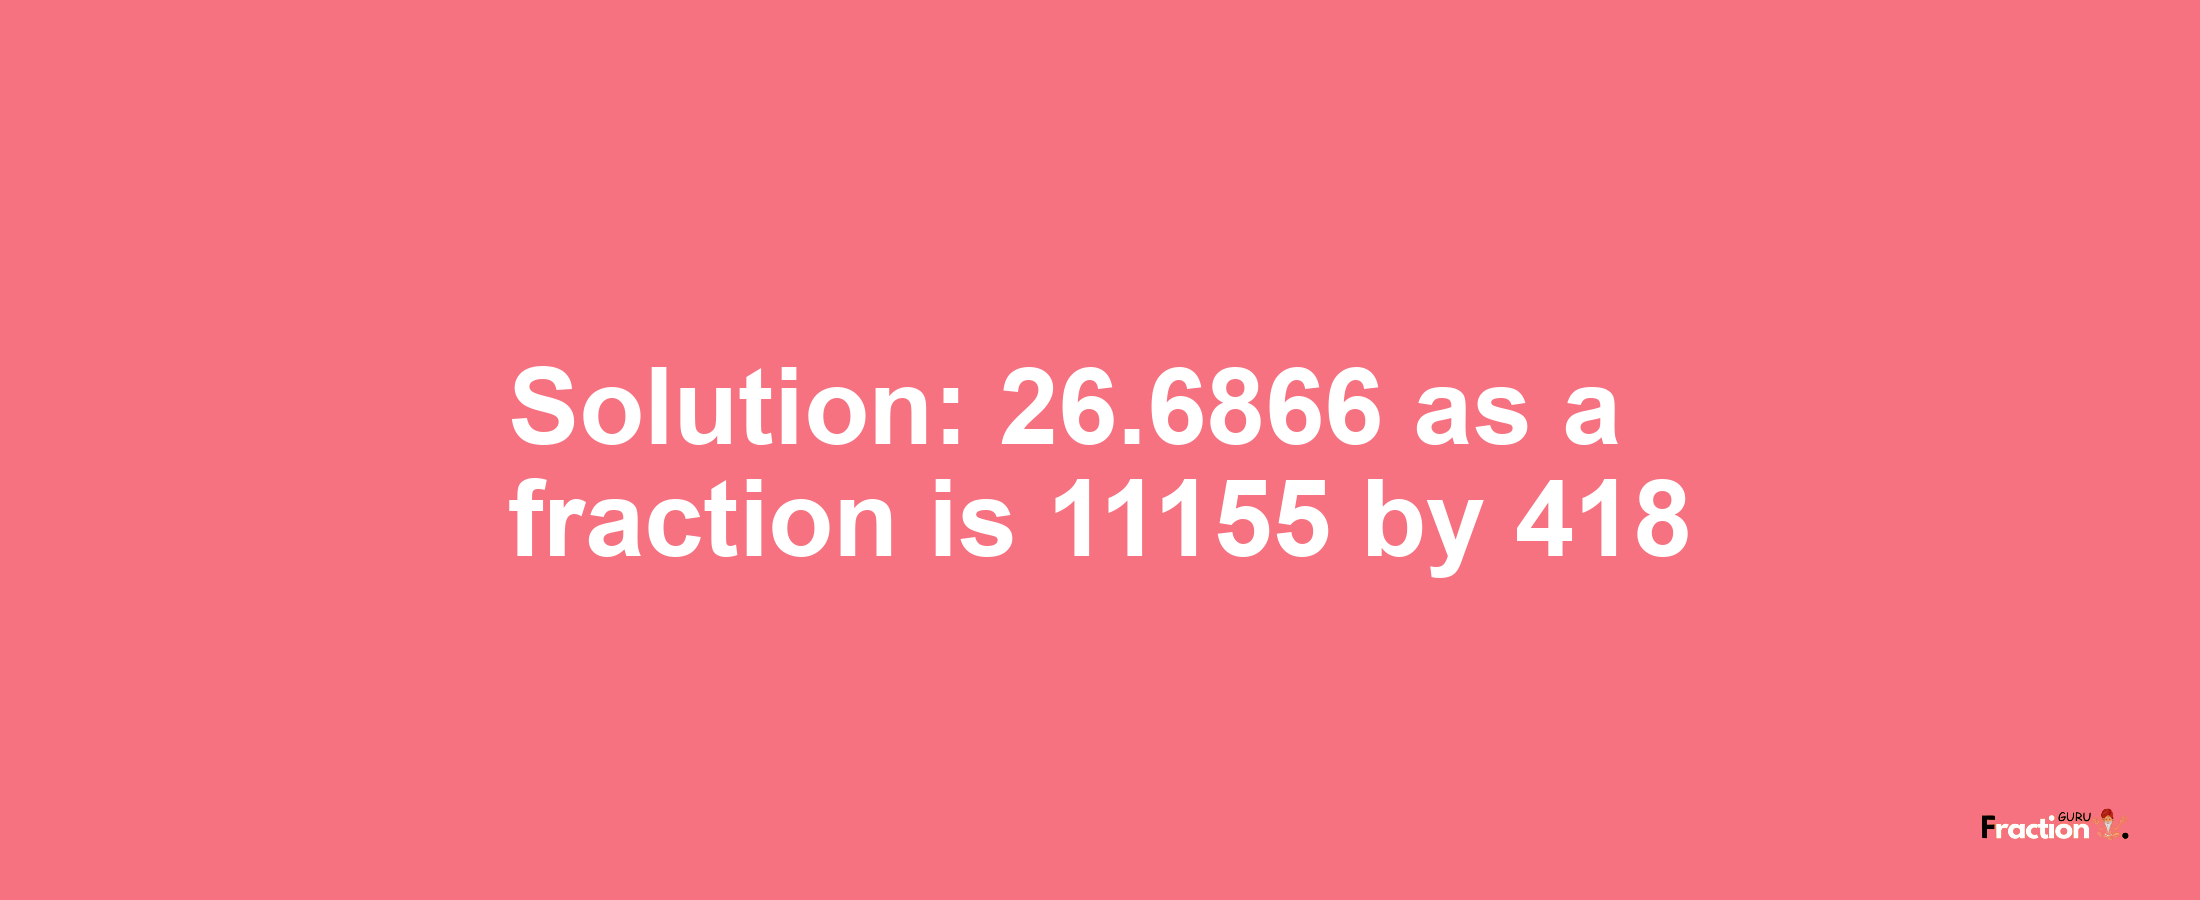 Solution:26.6866 as a fraction is 11155/418